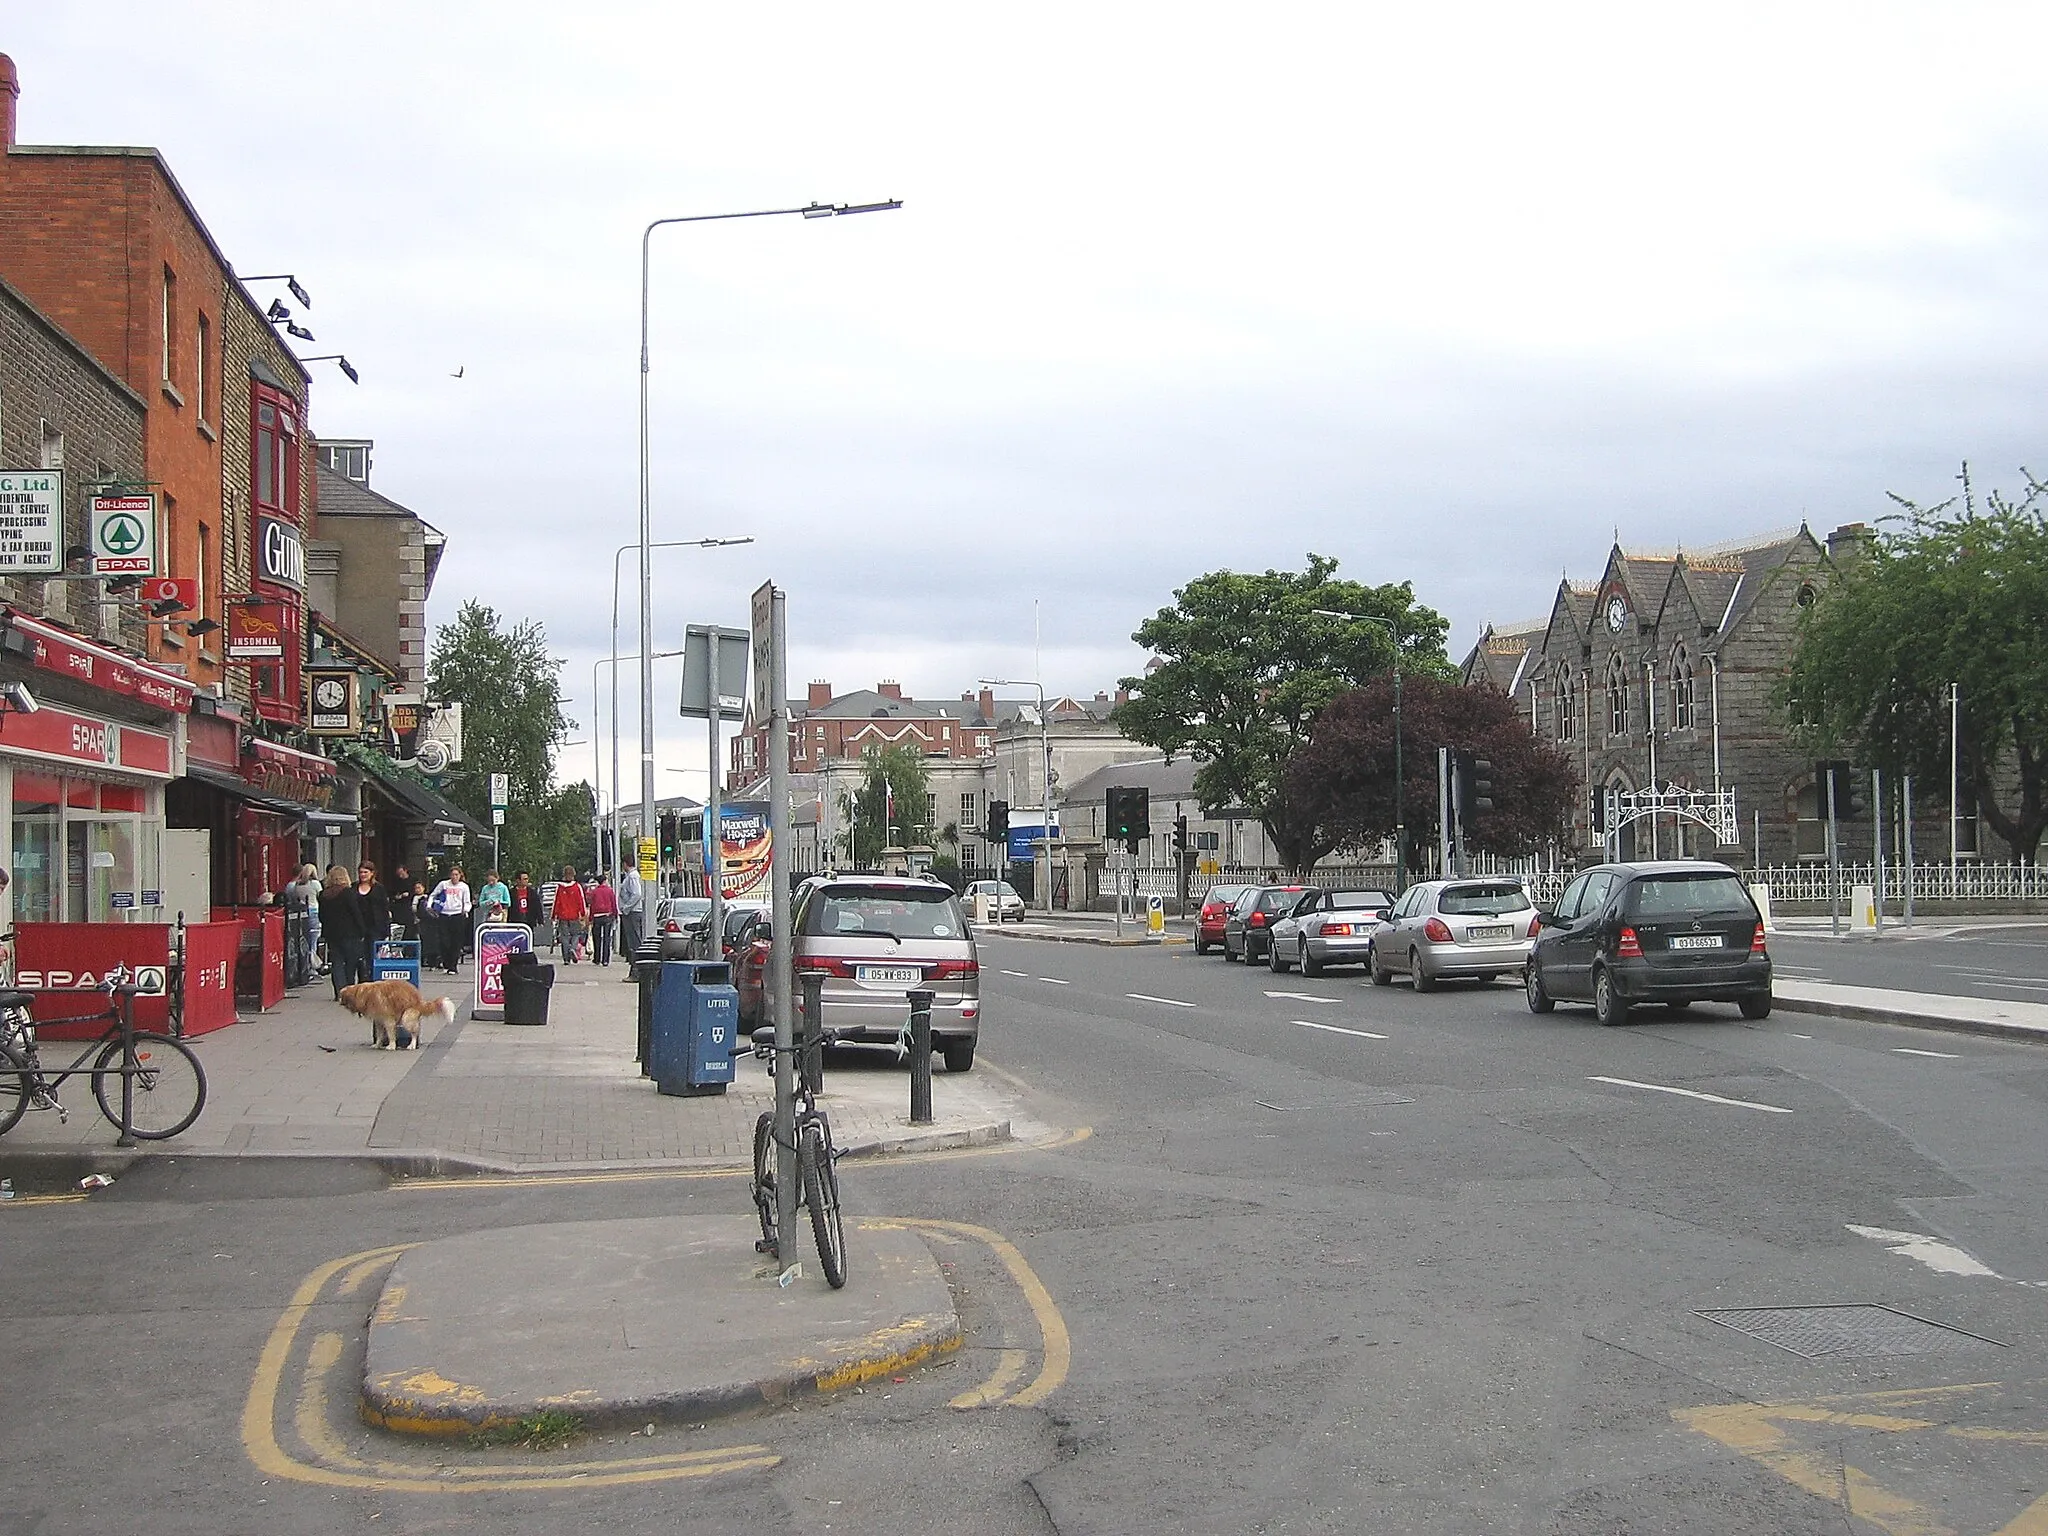 Photo showing: Ballsbridge Village with the RDS (Royal Dublin Society) in background, right.